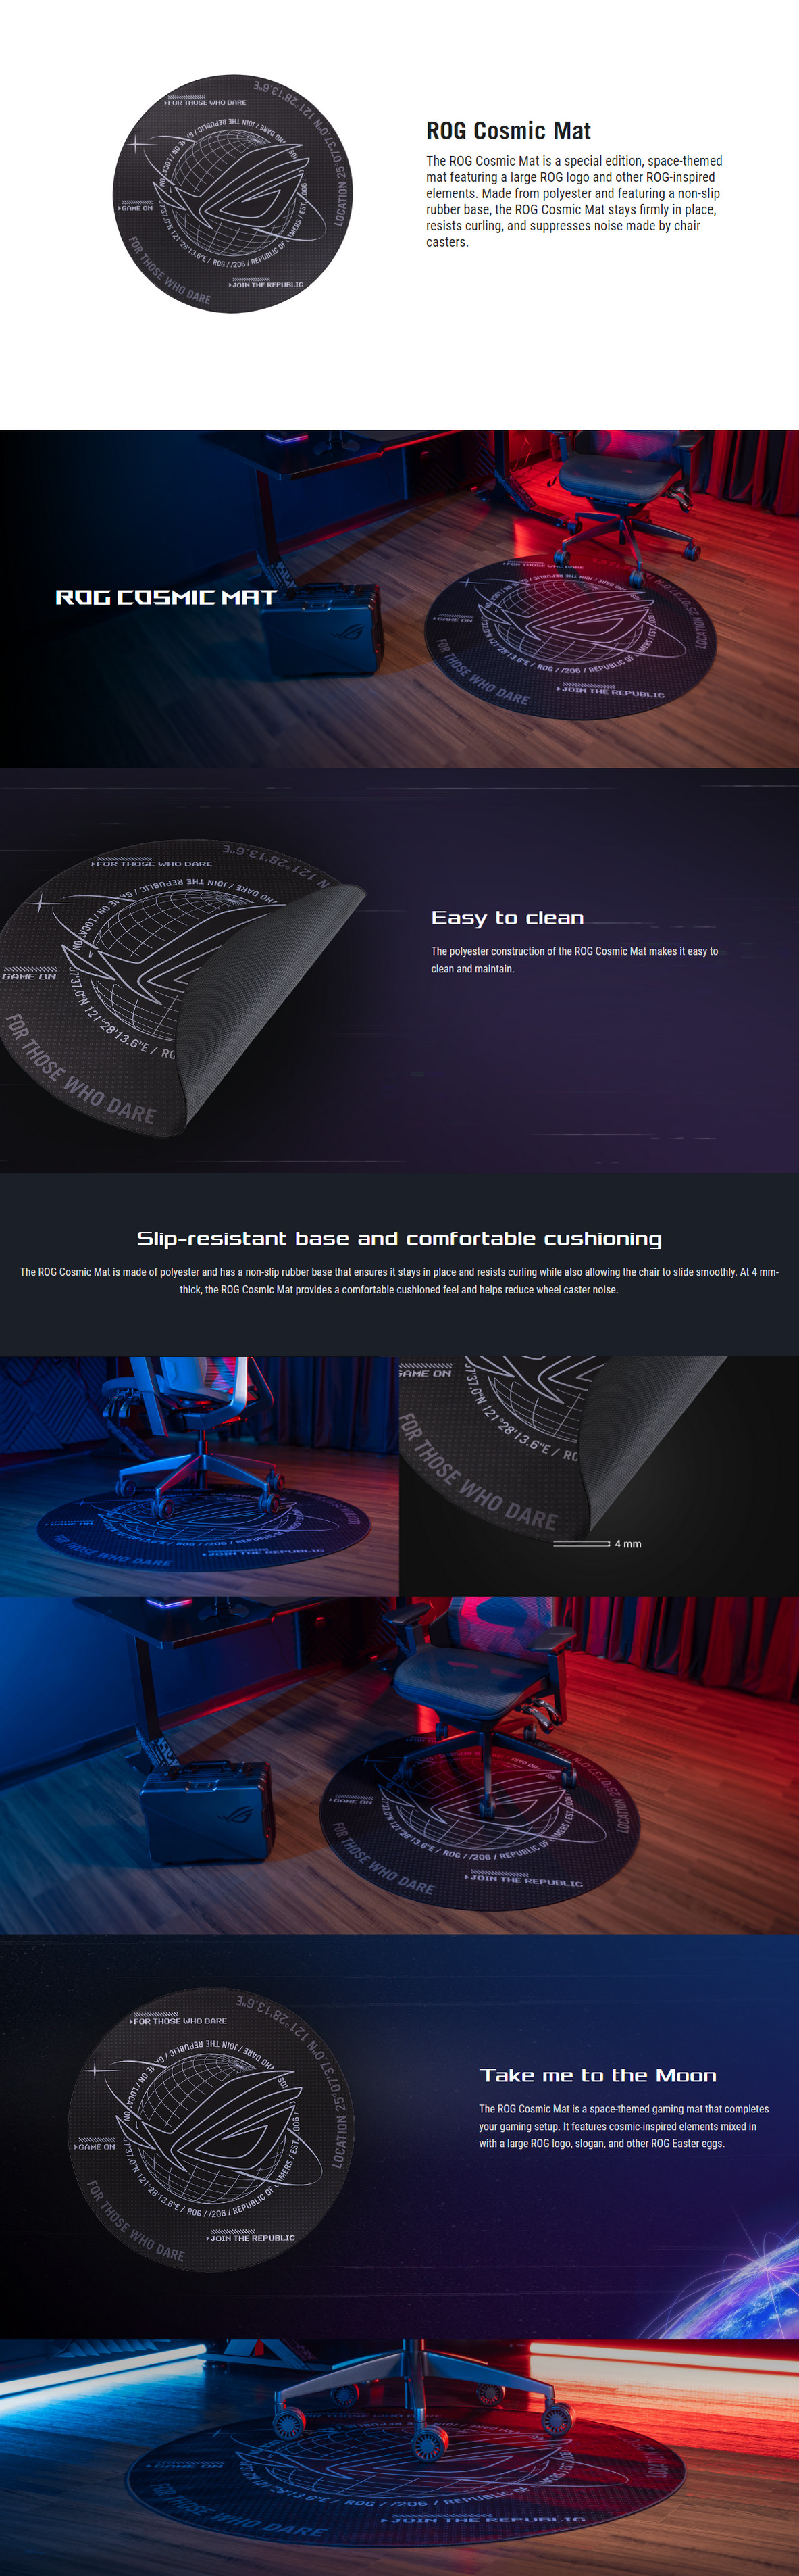 A large marketing image providing additional information about the product ASUS ROG Cosmic Mat - Additional alt info not provided